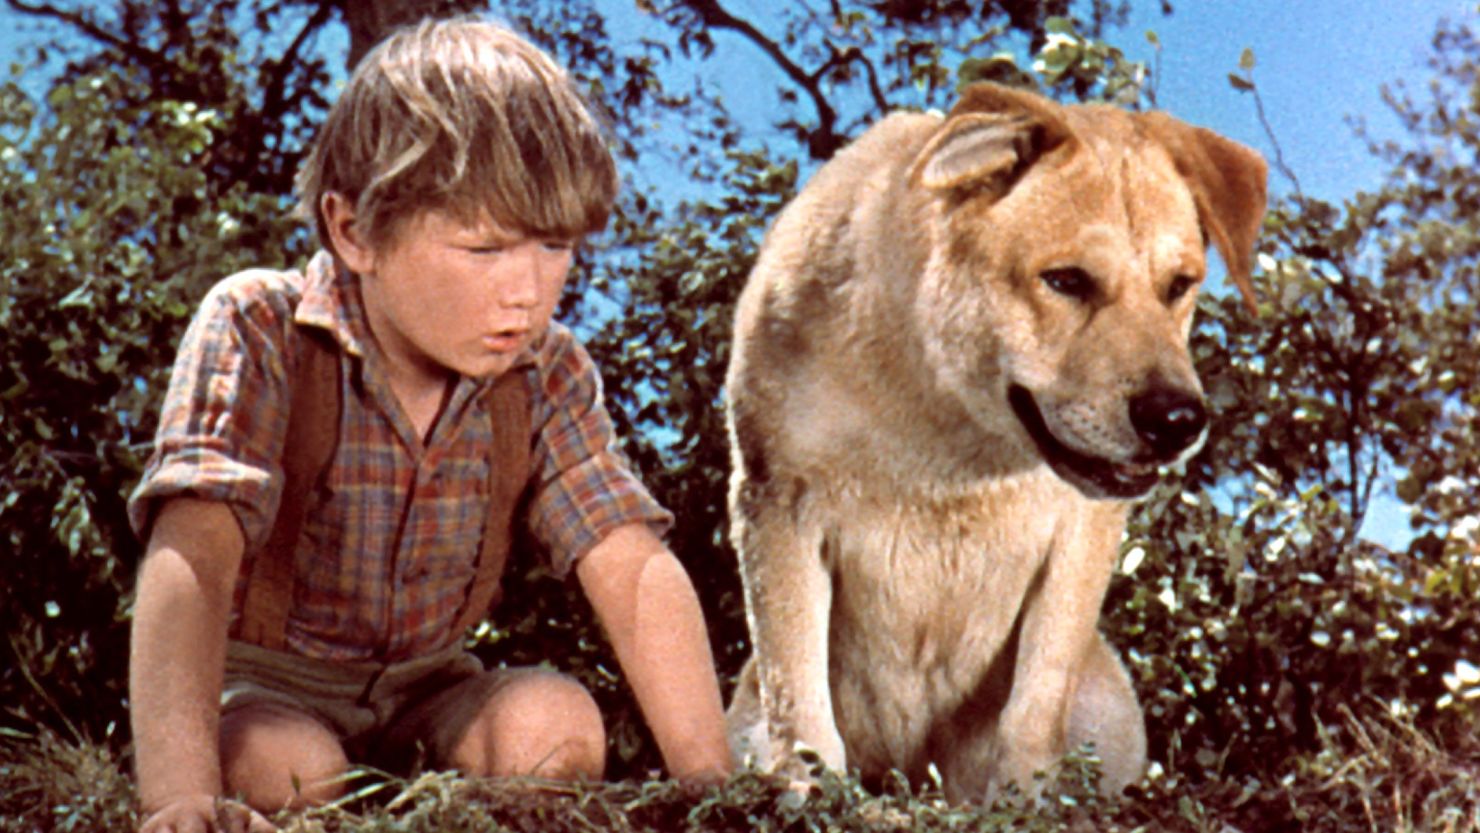 Kevin Corcoran in "Old Yeller"